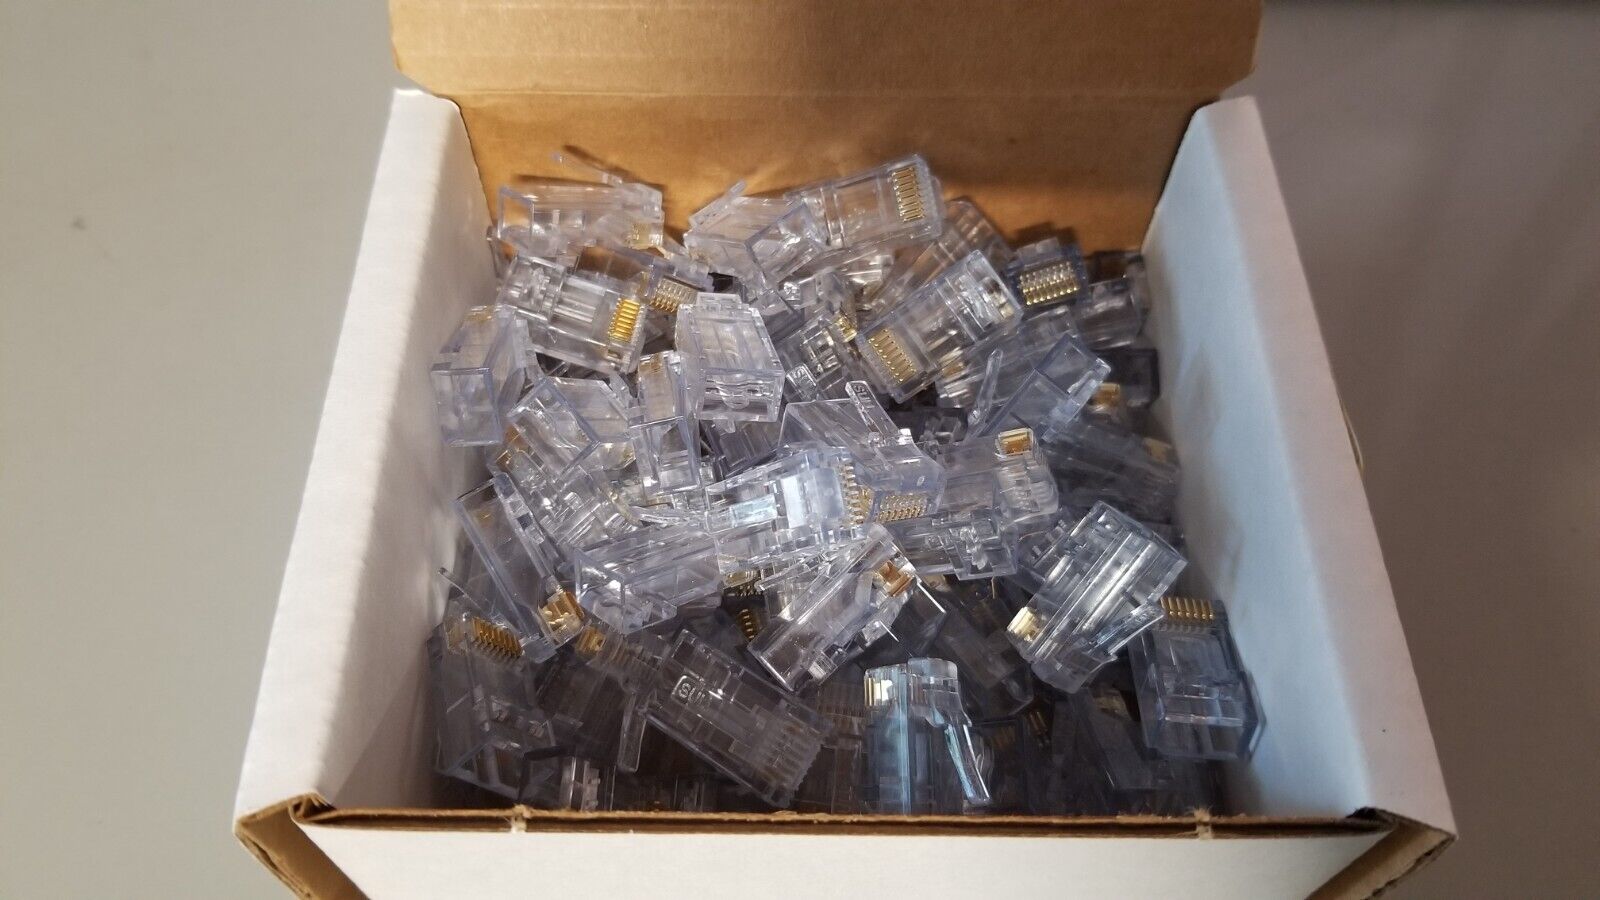 100 PACK of Wireless Solutions 478689 CAT6 RJ-45 Connectors